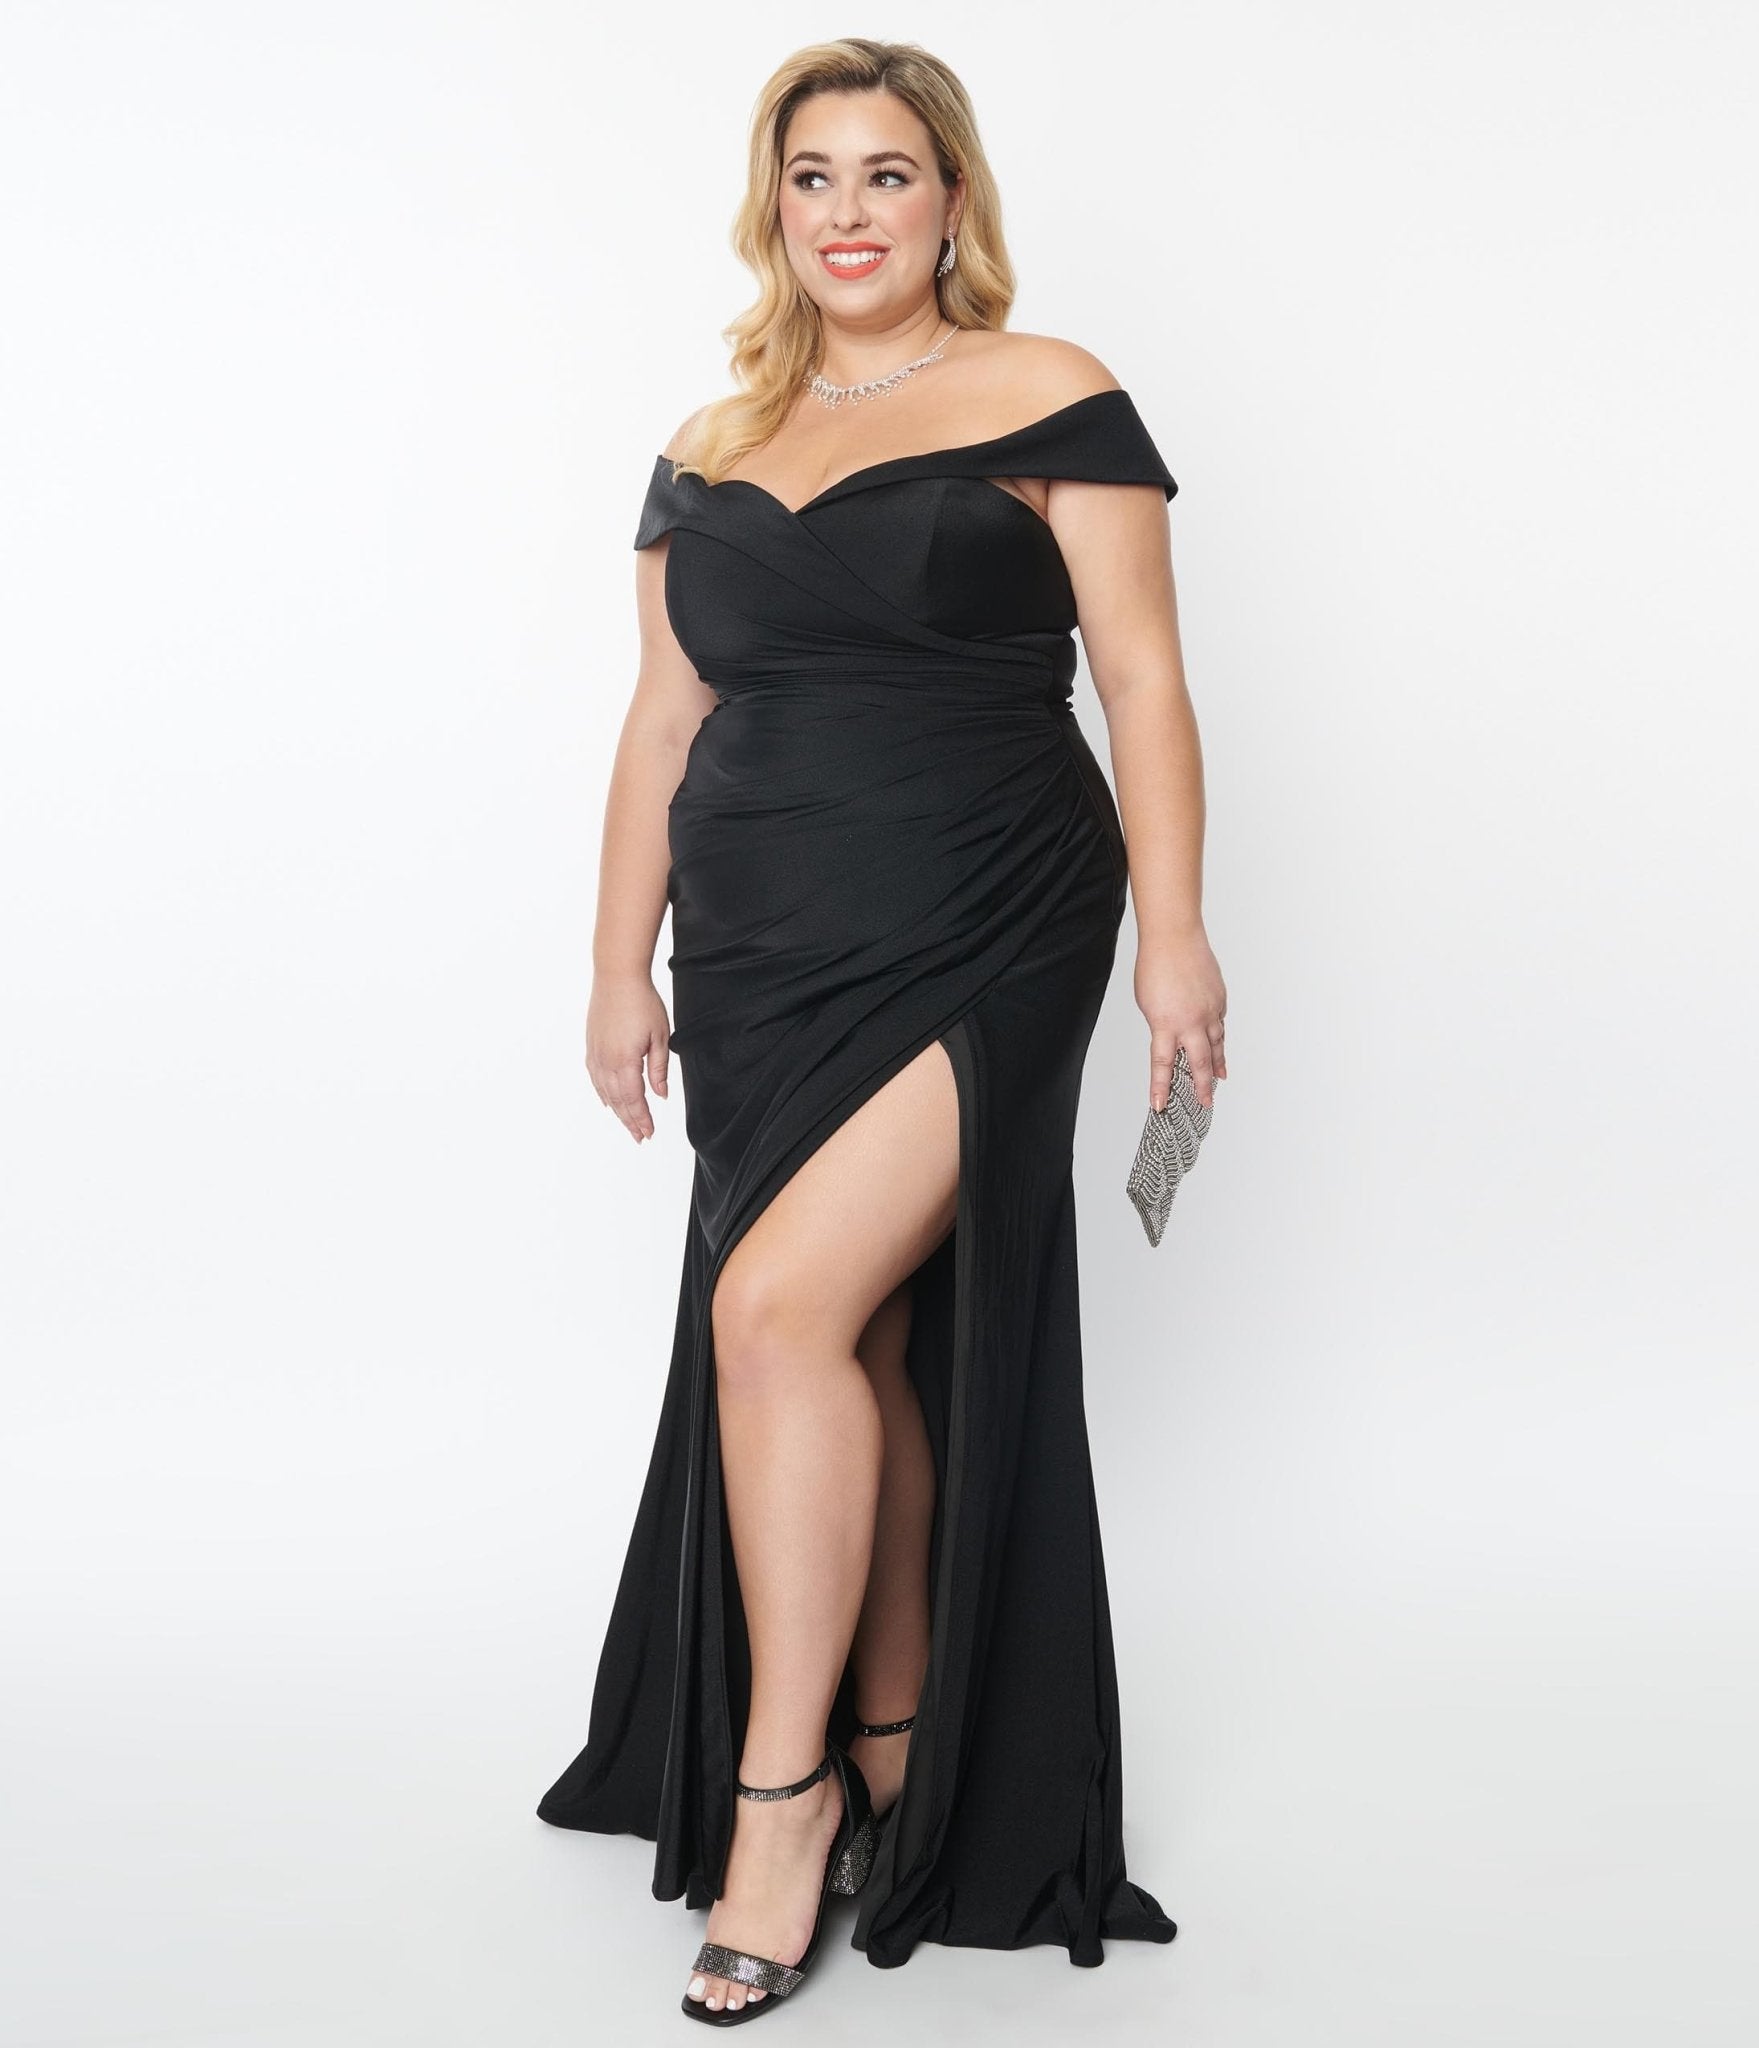 Plus Size Gowns For Real African Women | Bridesmaid dresses plus size,  Wedding dresses plus size, Plus size wedding gowns